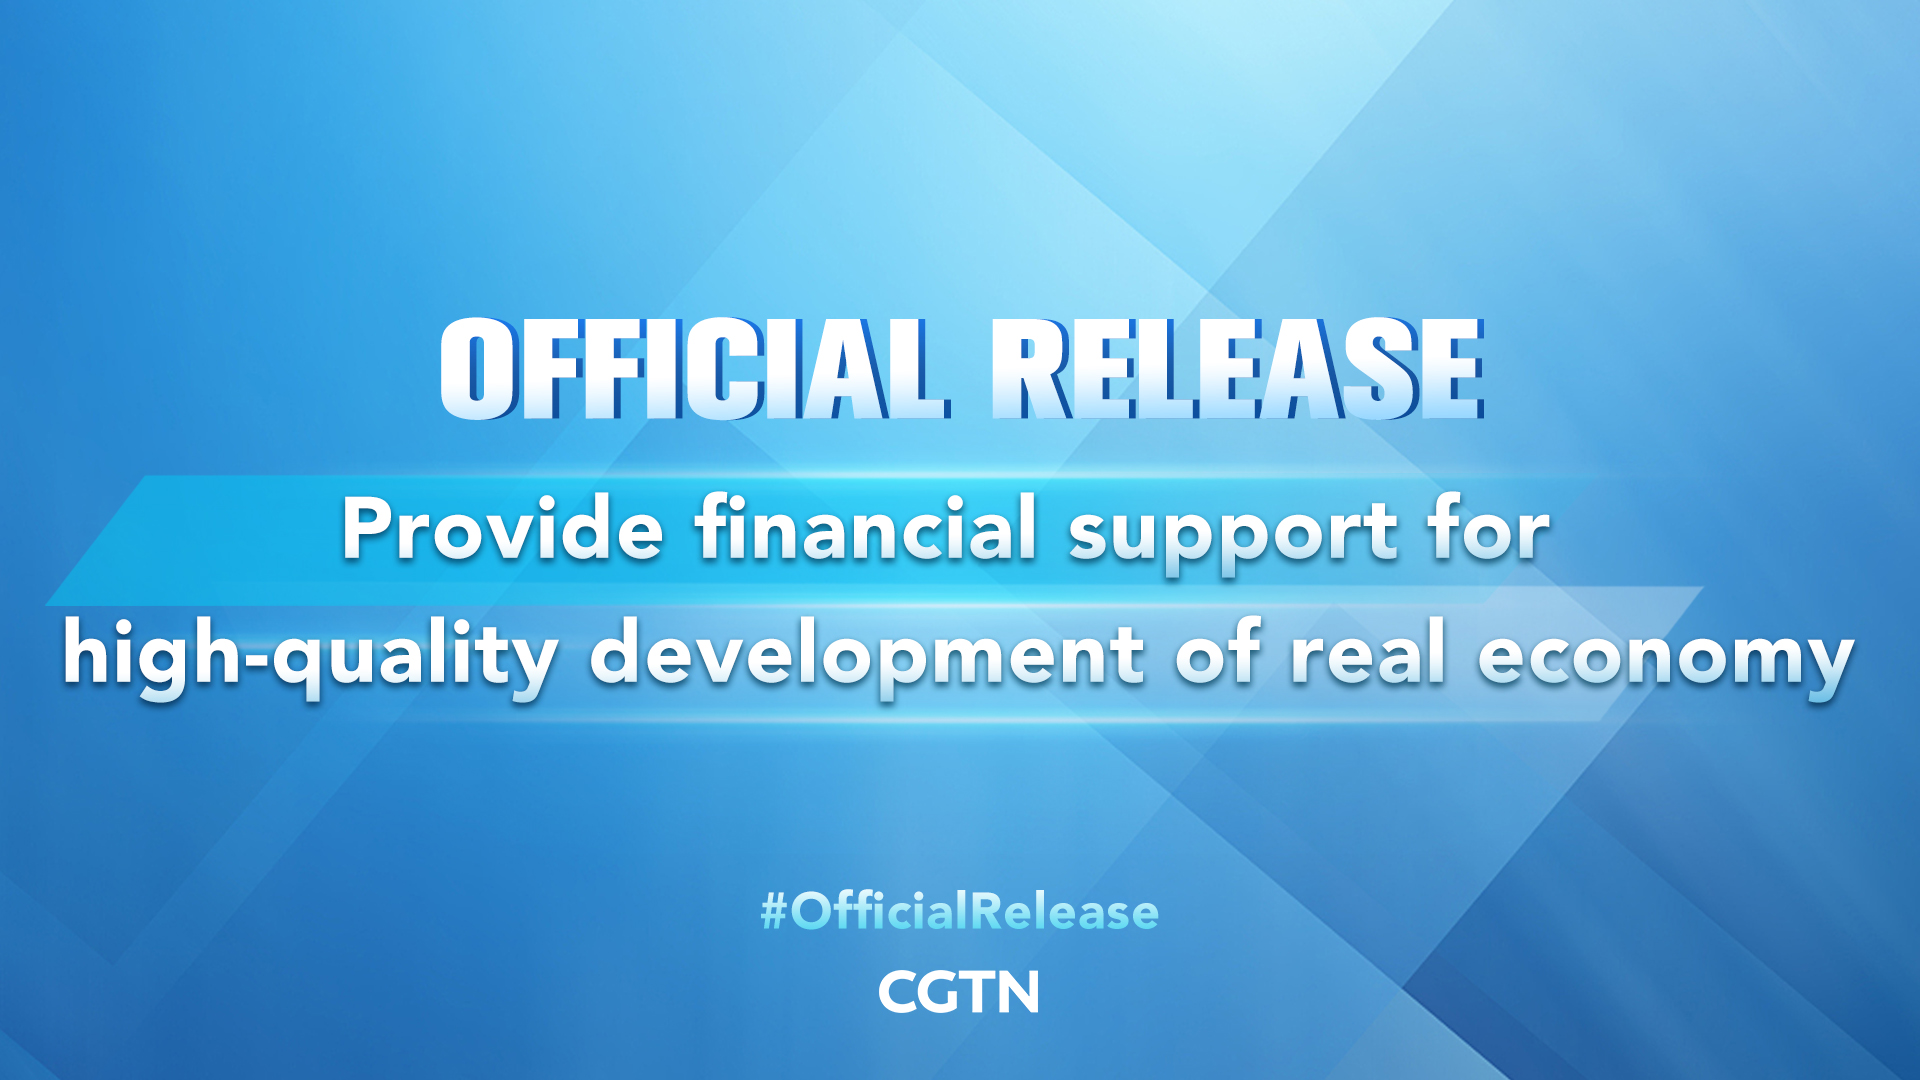 Live: SCIO briefing on providing financial support for high-quality development of real economy